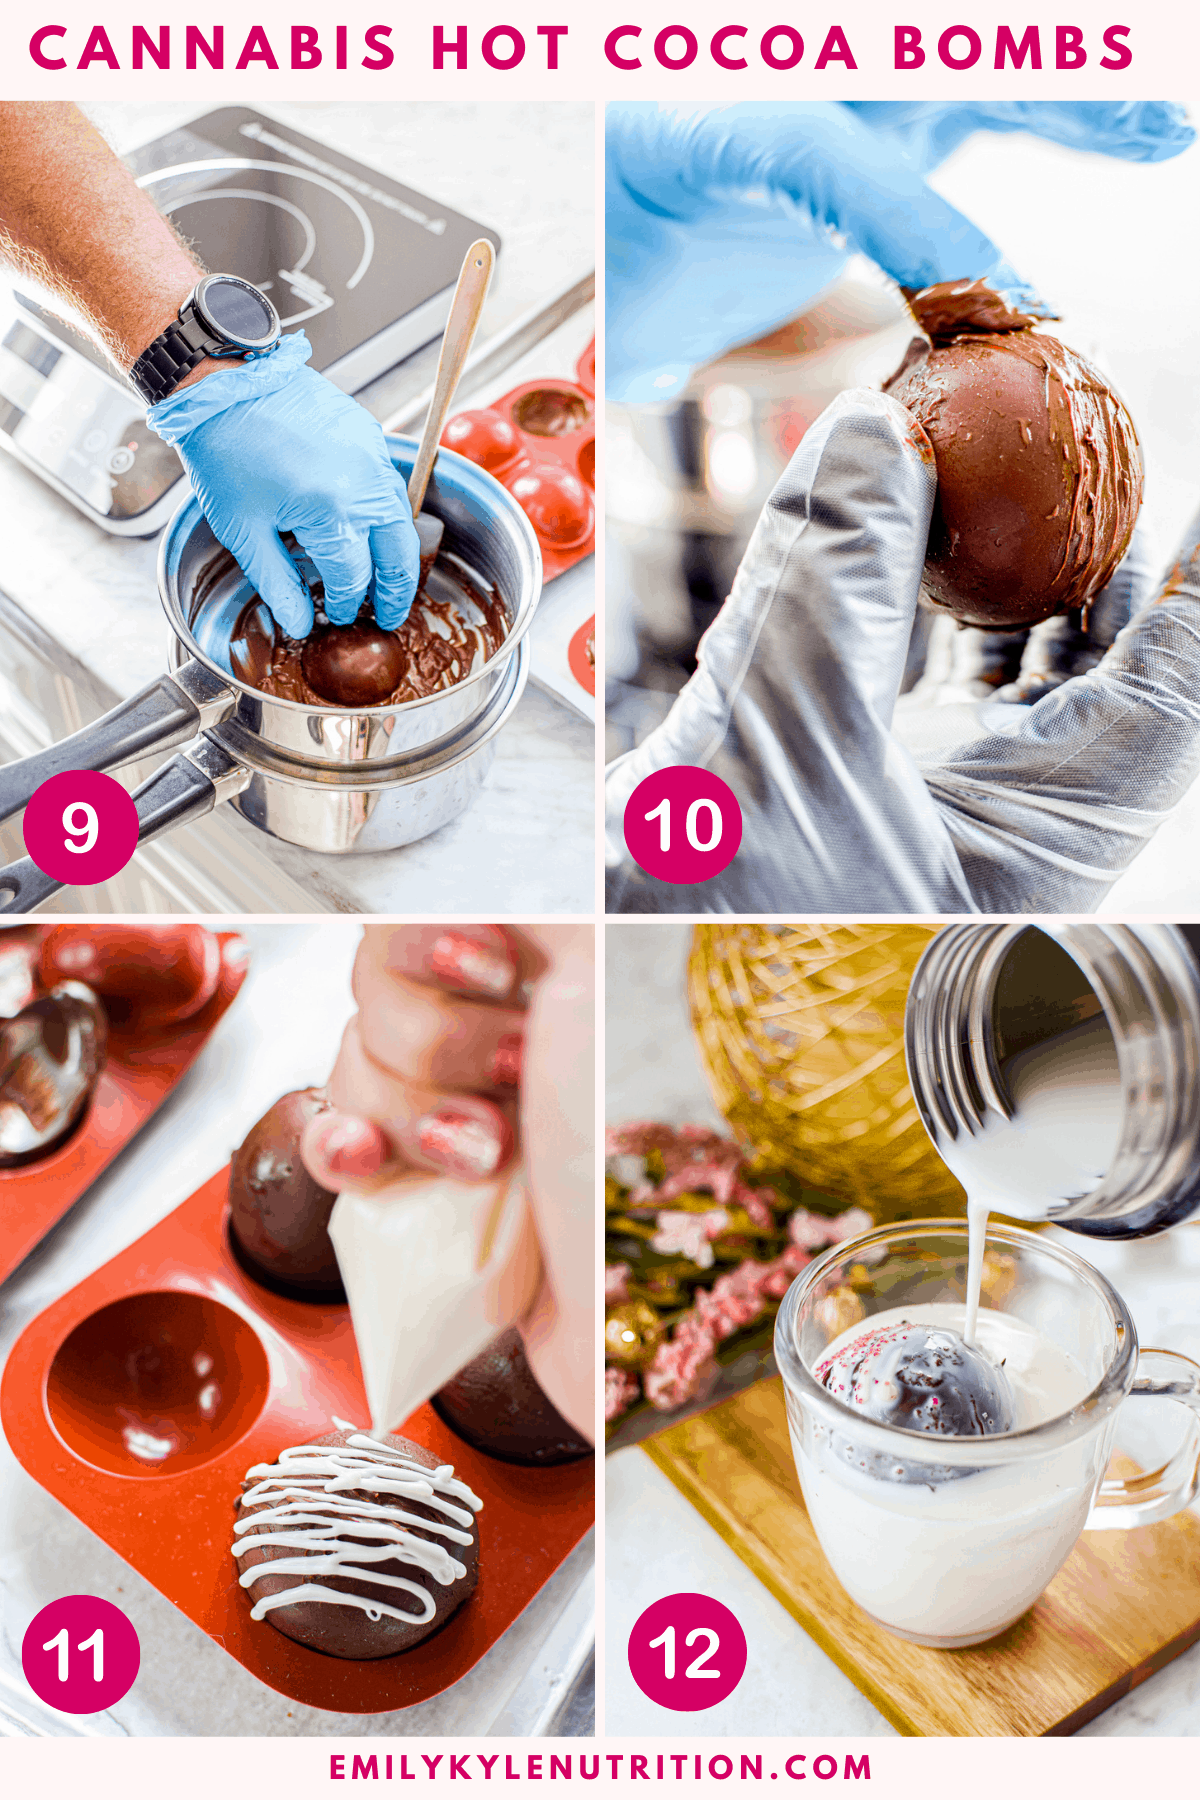 A 4-step image collage showing steps 9-12 in making hot cocoa bombs including melting the rims of the chocolate cups, putting them together and sealing with chocolate, garnishing with white chocolate, and pouring milk over them